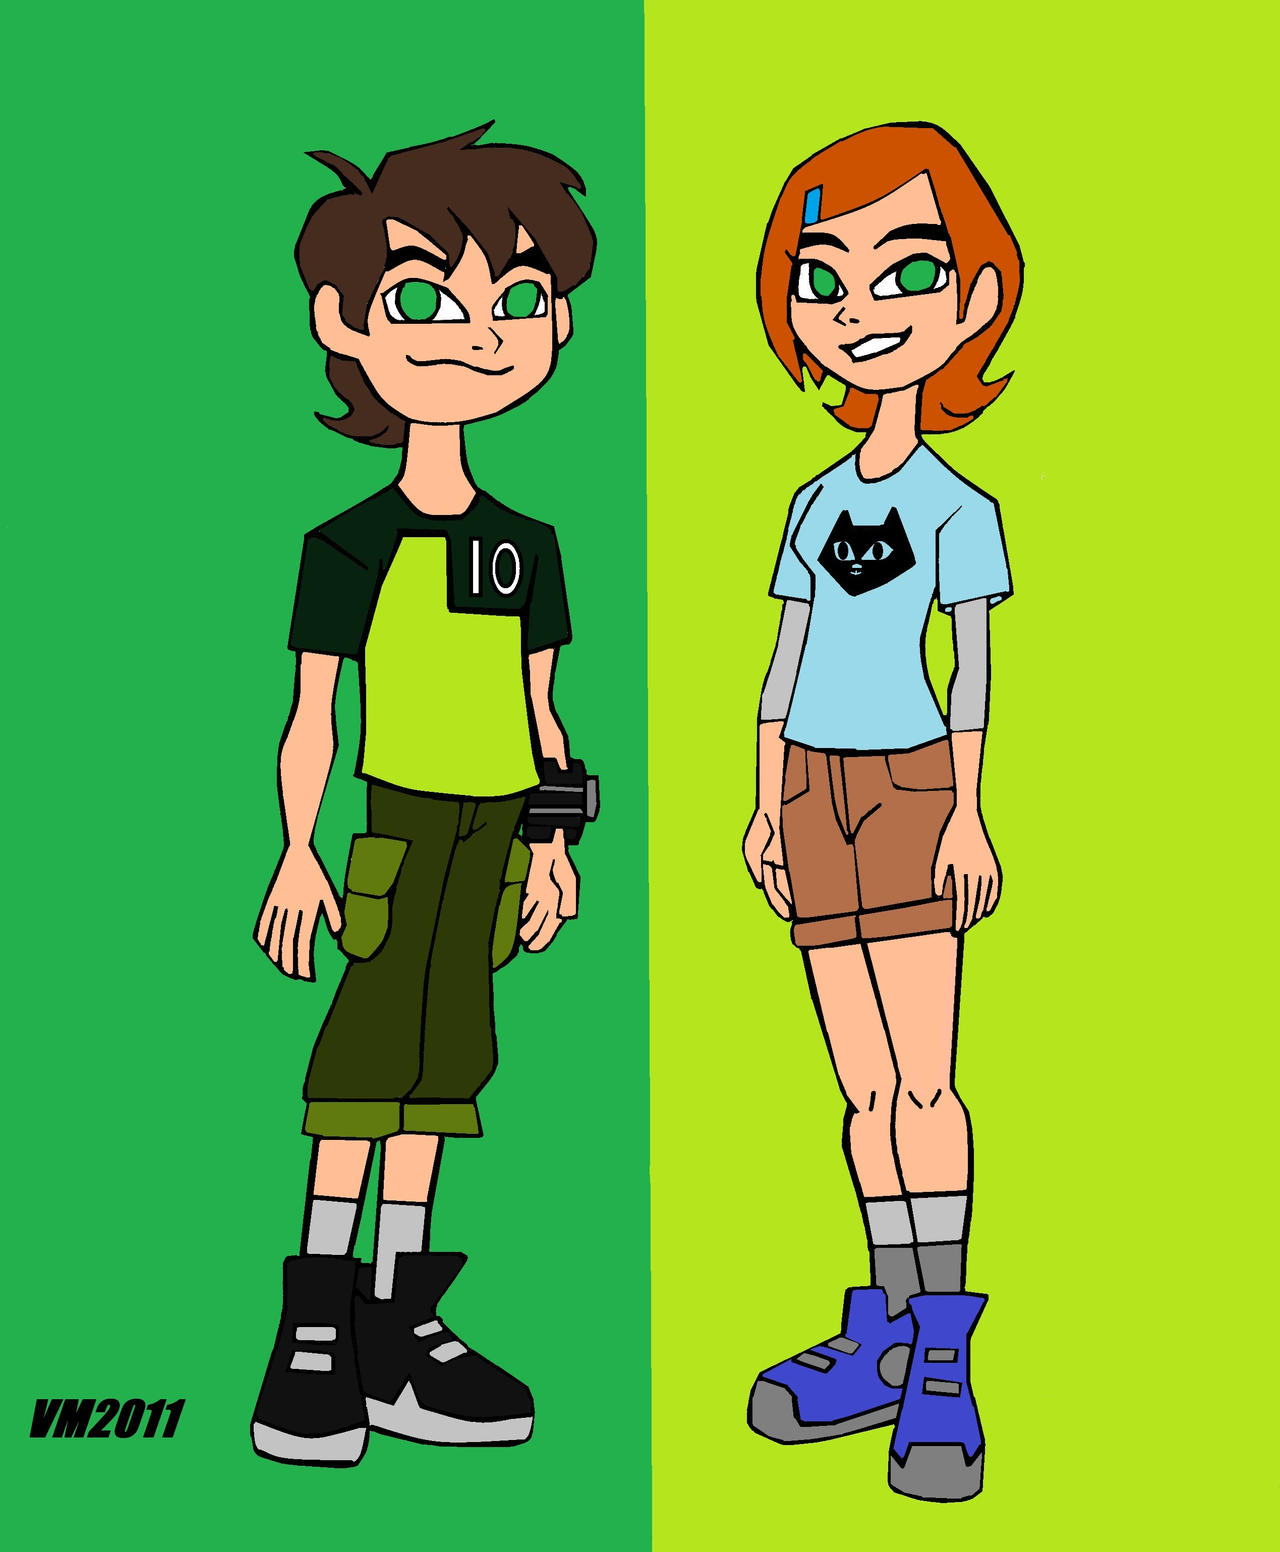 Is the Ben 10 Reboot really that bad? (My thoughts on it)